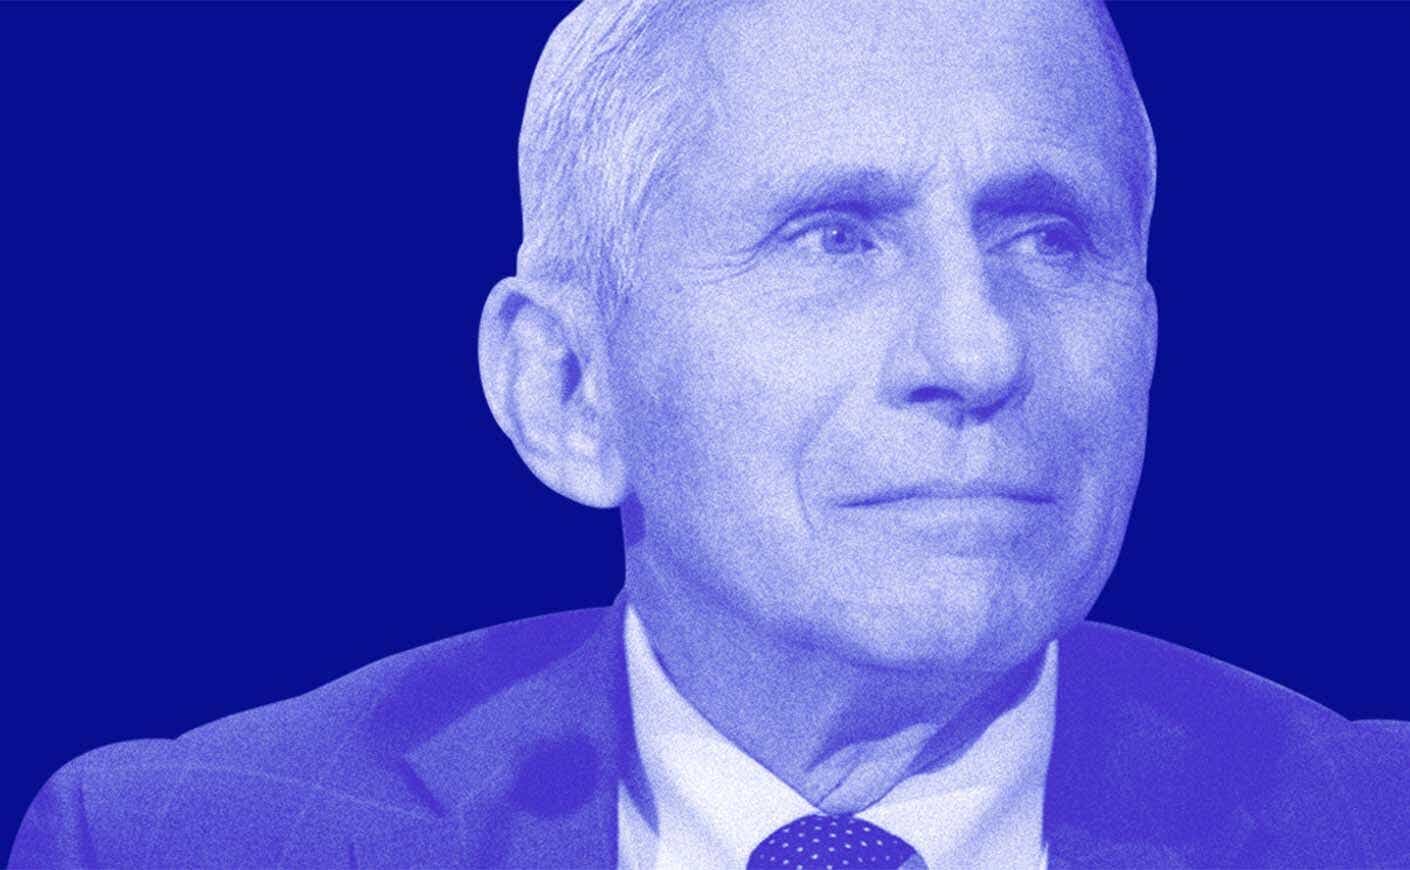 Dr Fauci face on blue background